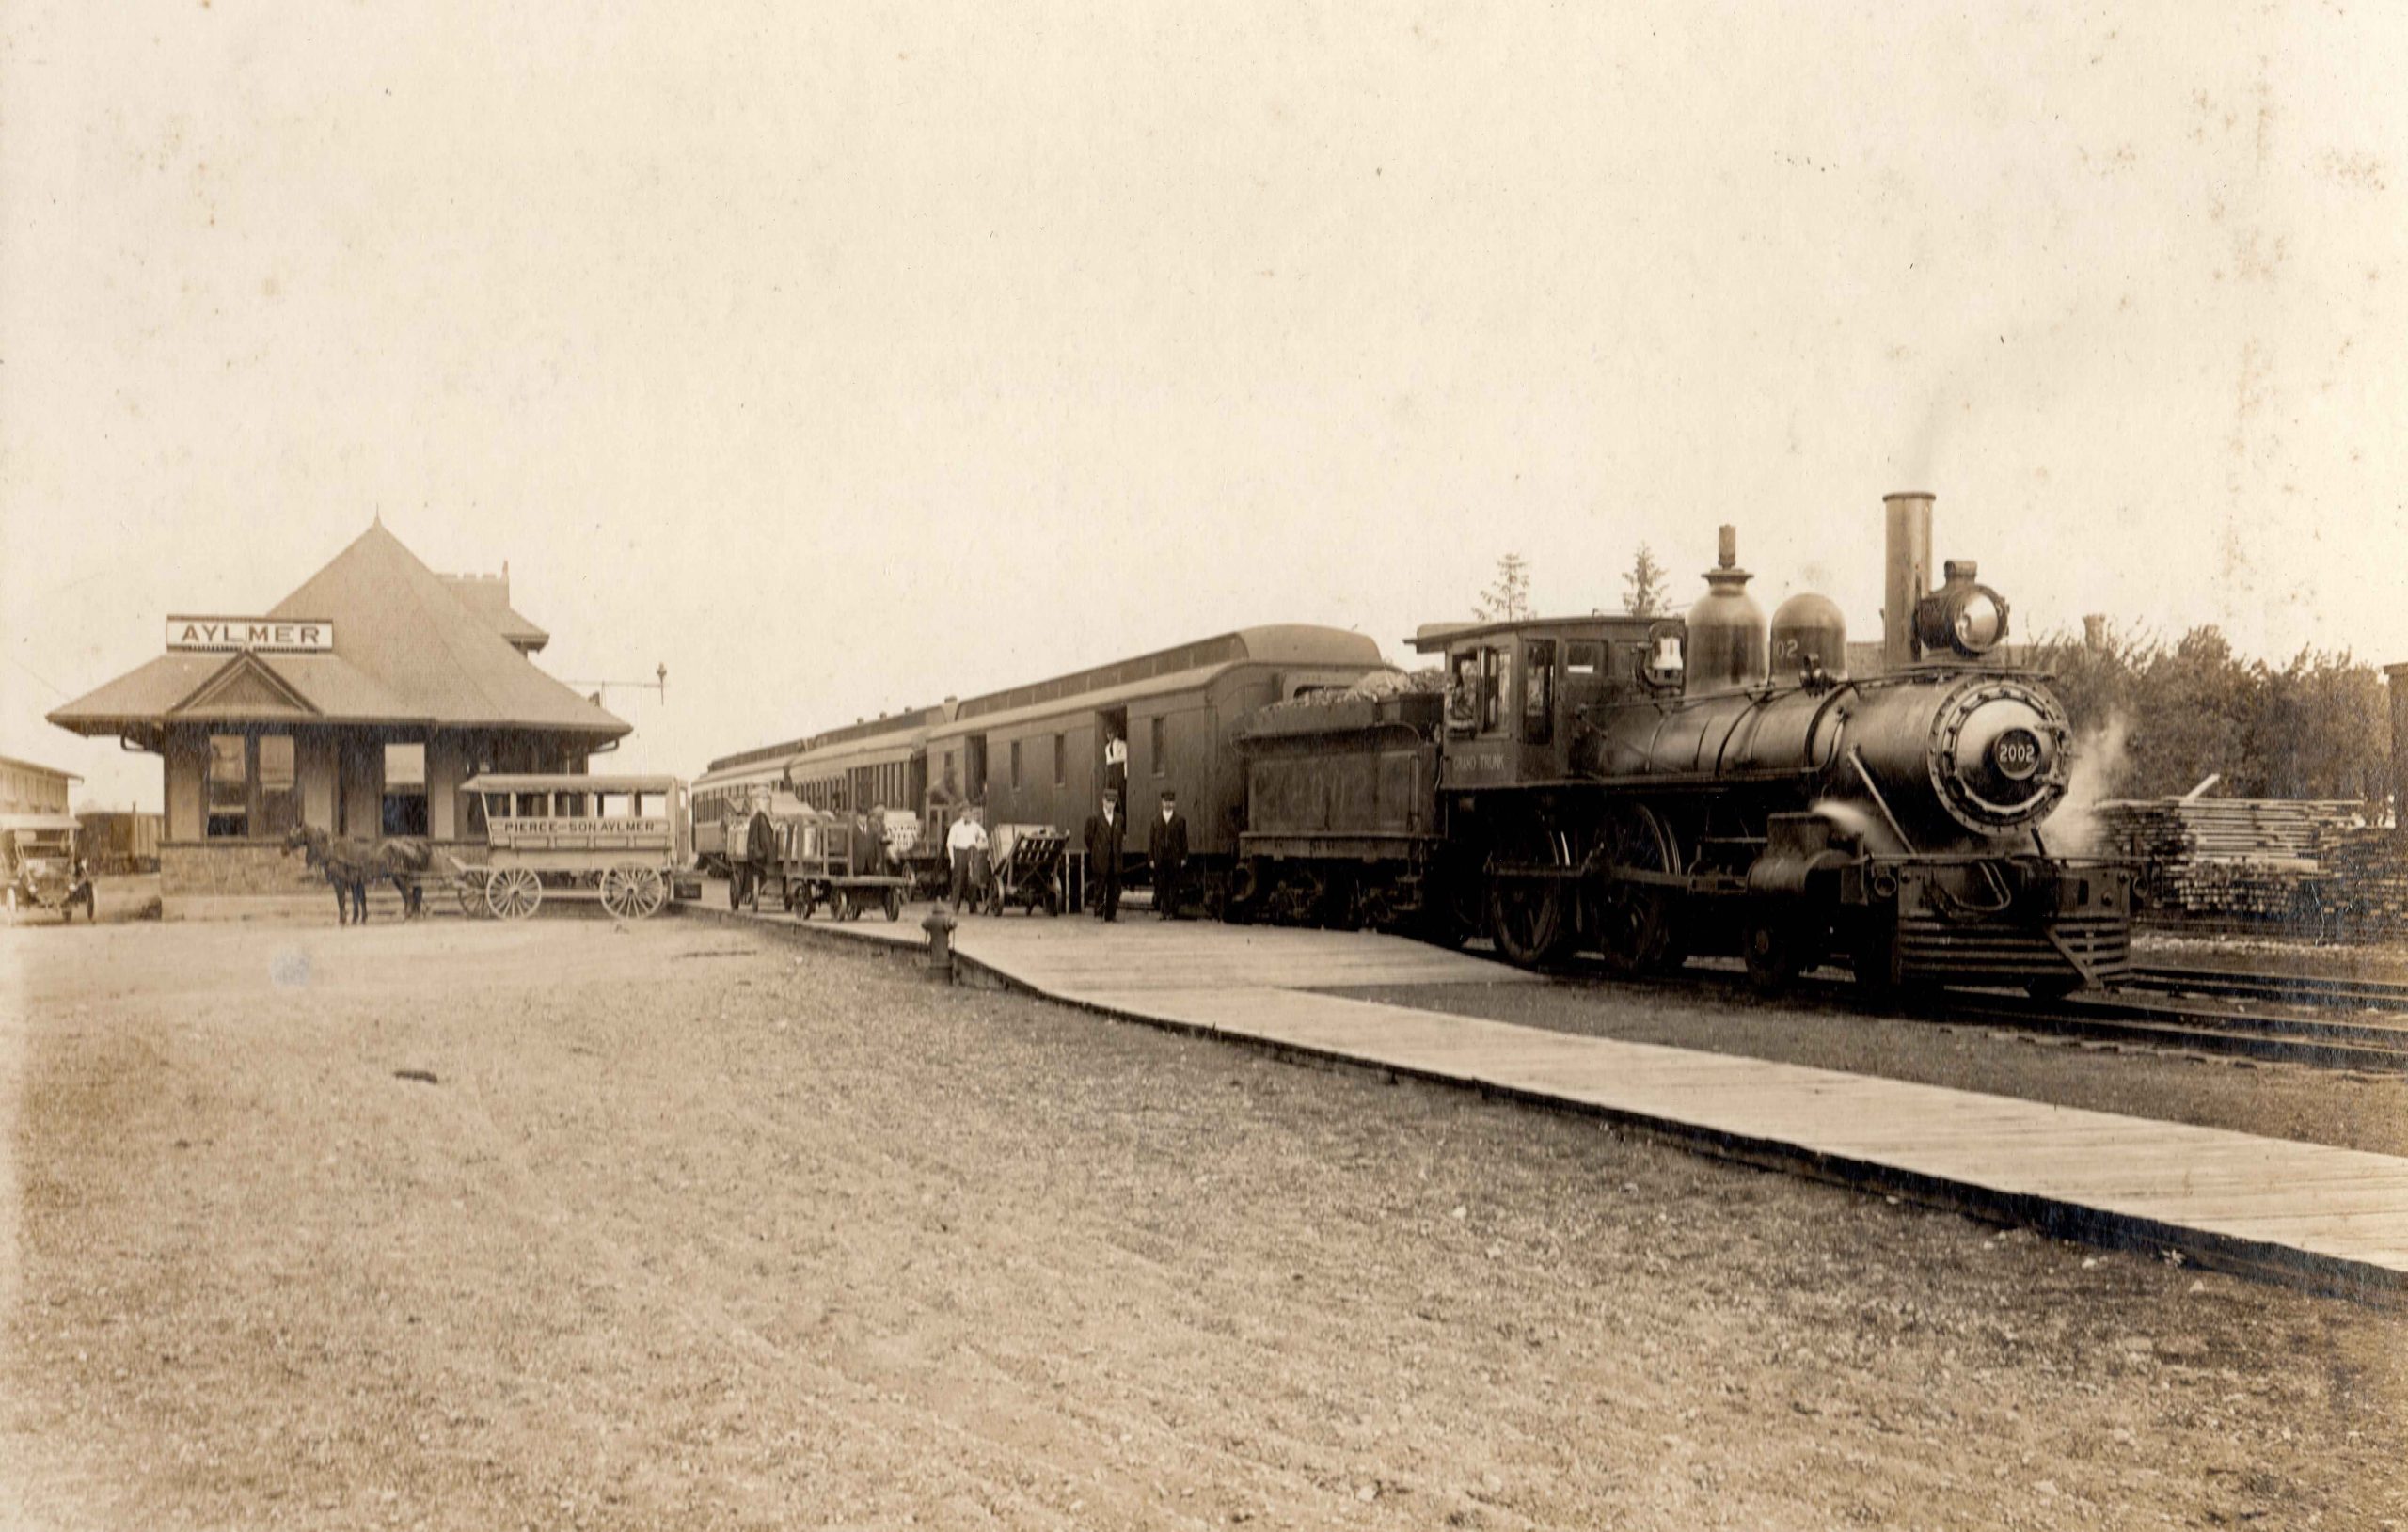 Train at the Aylmer Grand Trunk station